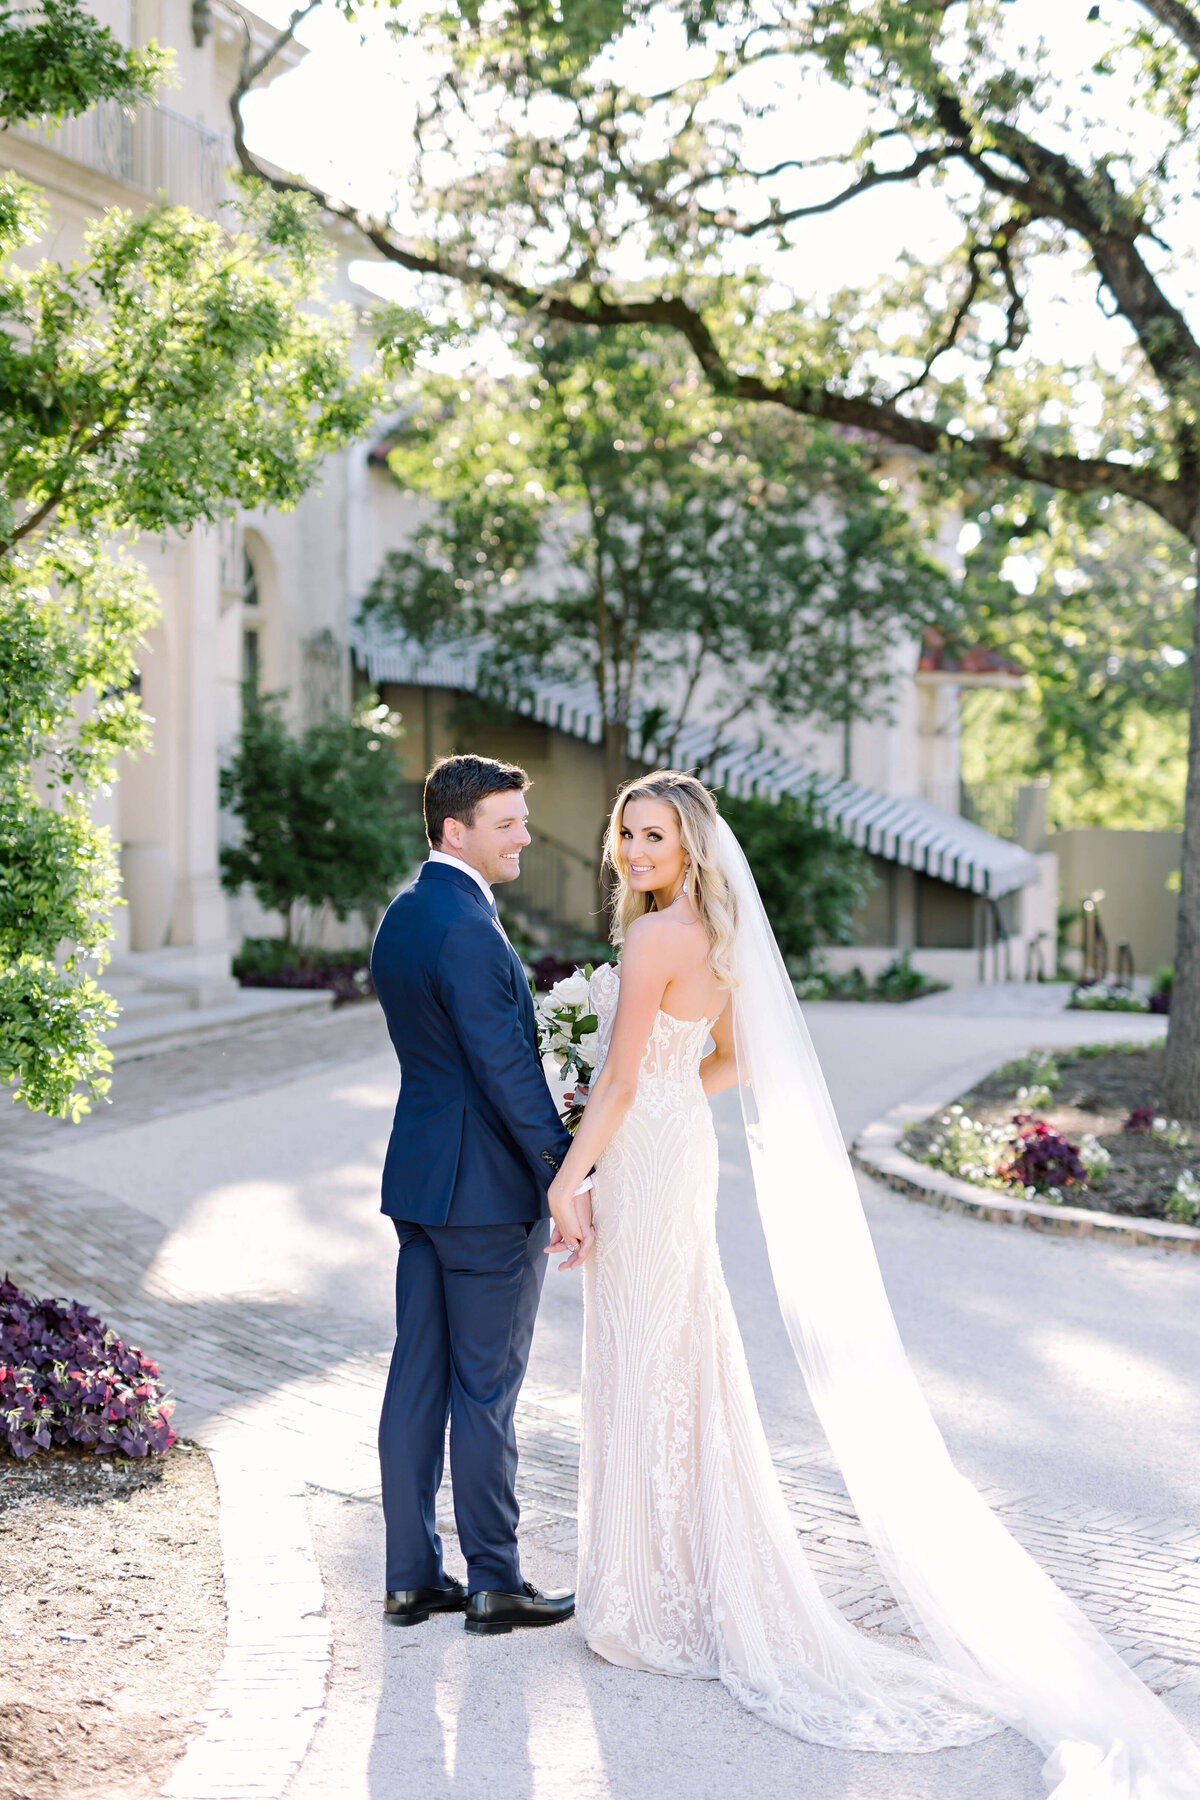 Couples portraits at sunset at Commodore Perry Estate in Austin